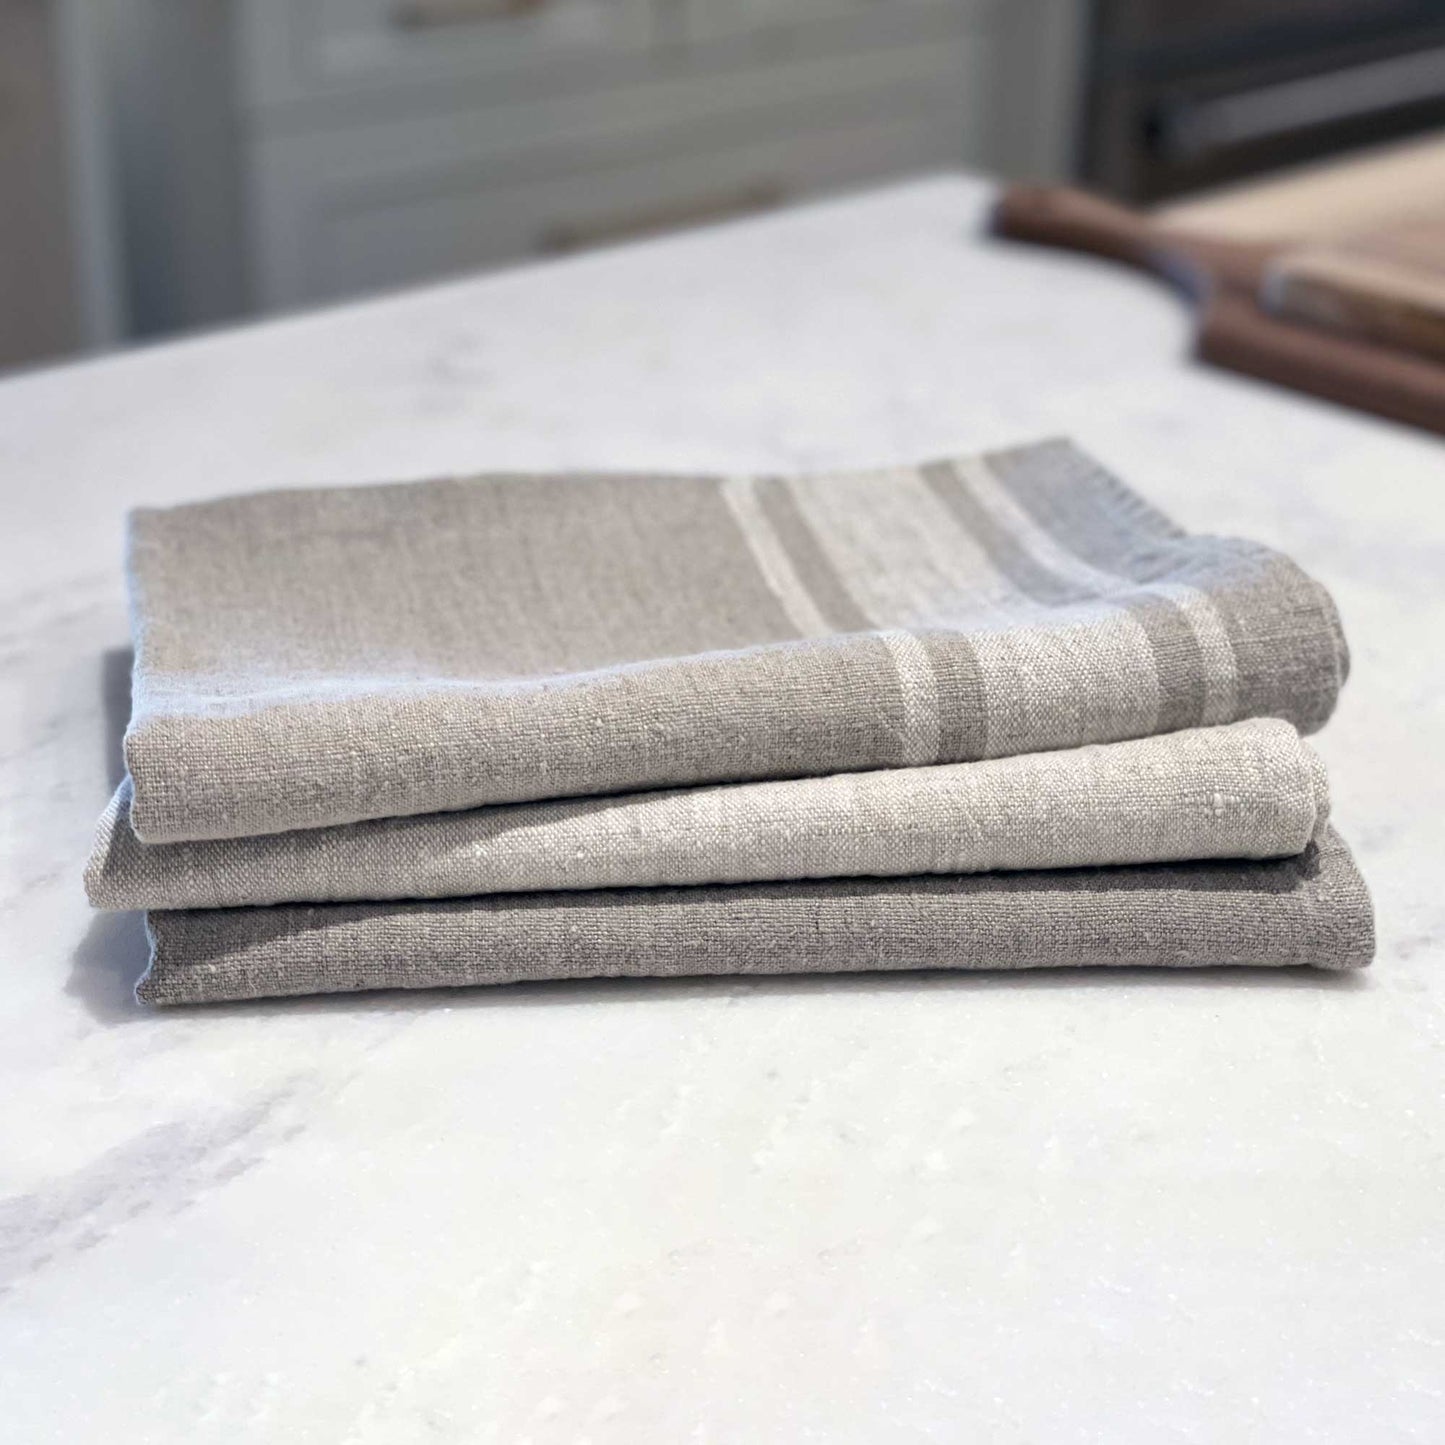 Linen Kitchen Towel lifestyle flat lay product stack shot in color Natural by LinenCasa for South Hous.